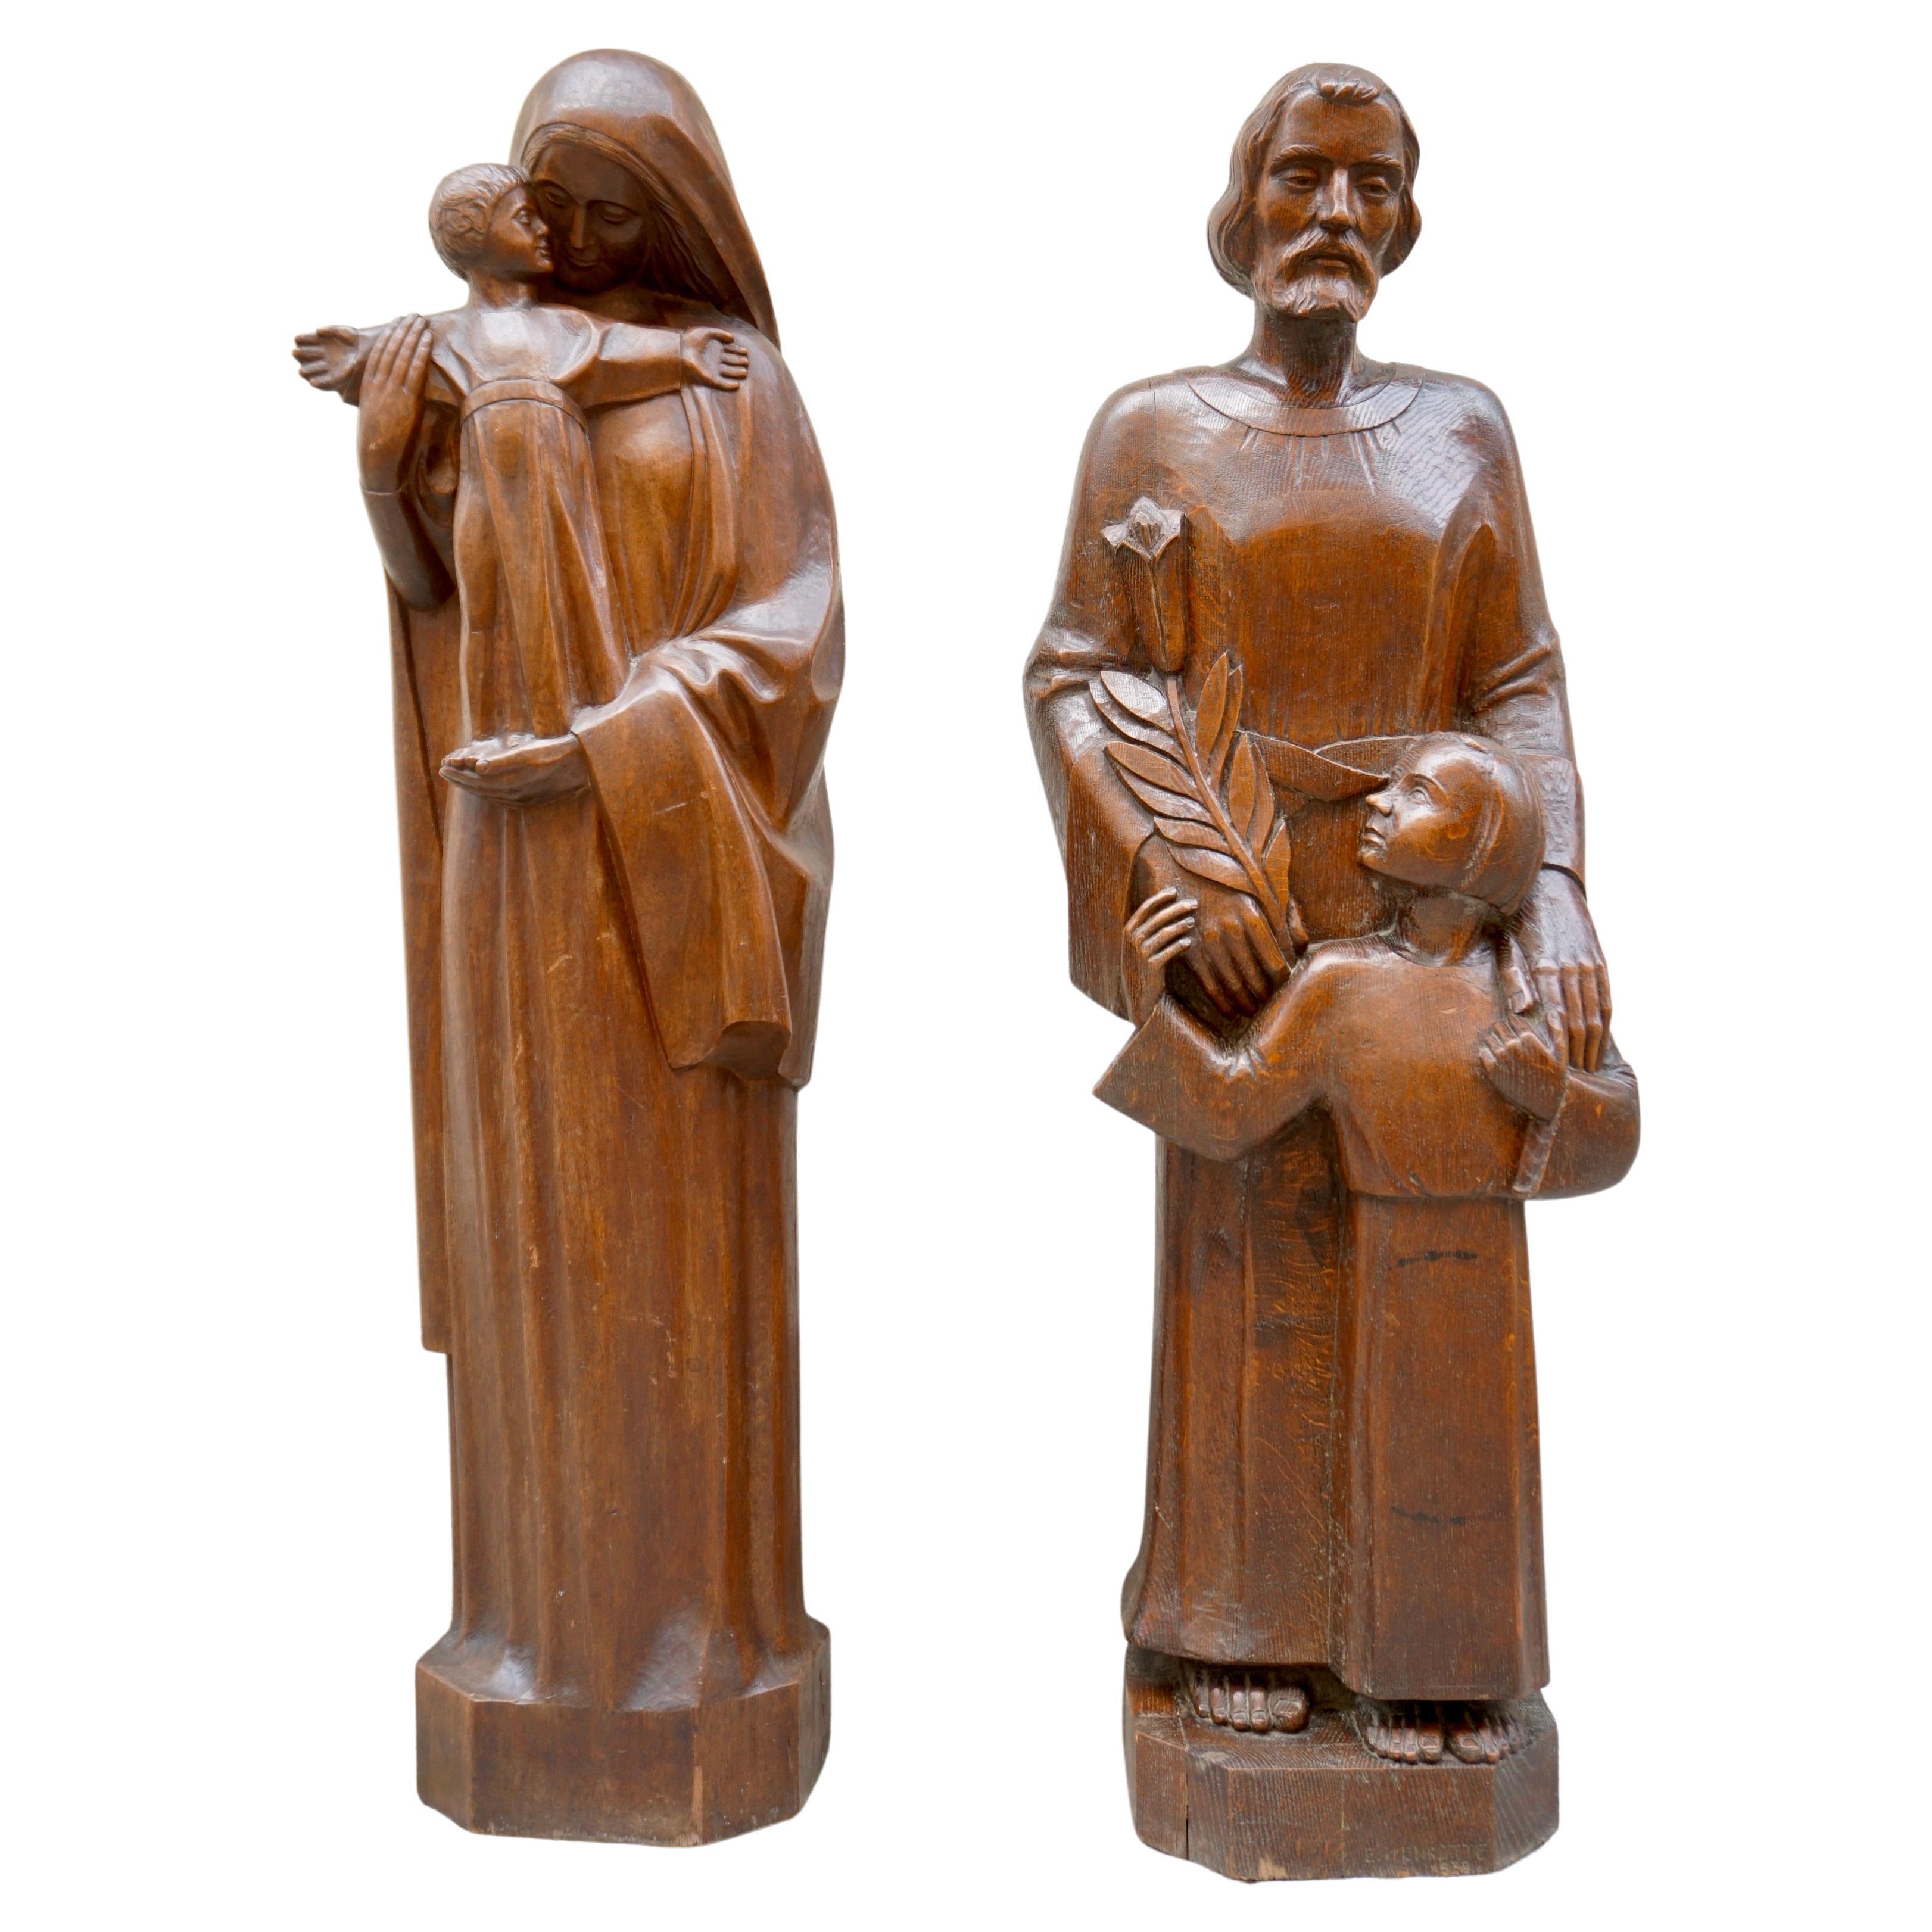 Two large sculptures statue in oakwood, representing Saint Joseph and child and the Madonna and child, standing on her arm.In the style of Hildo Krop, Amsterdam school style.
Signed E. Henrotte,1939.Belgium.

Madonna
Height 56.6